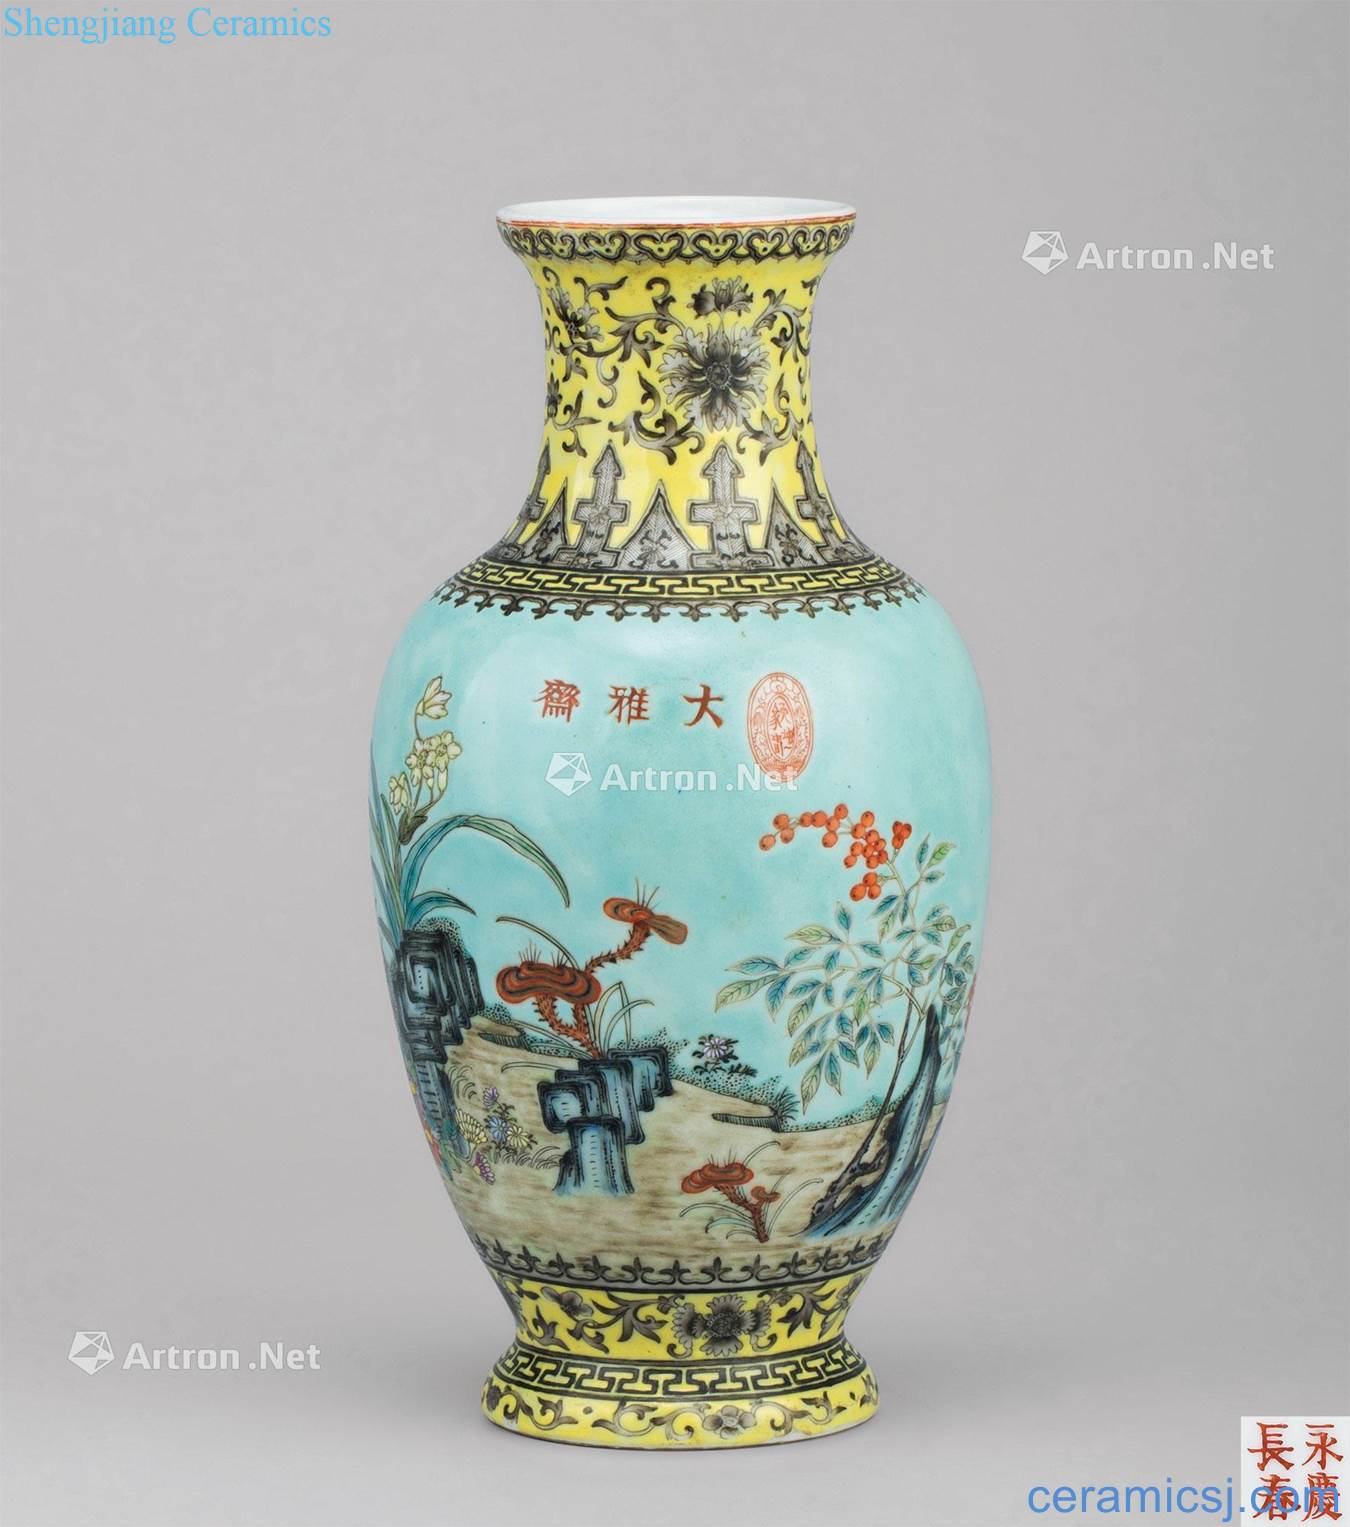 Late qing dynasty (1851 ~ 1911) great lent Green pastel blue stone bottles